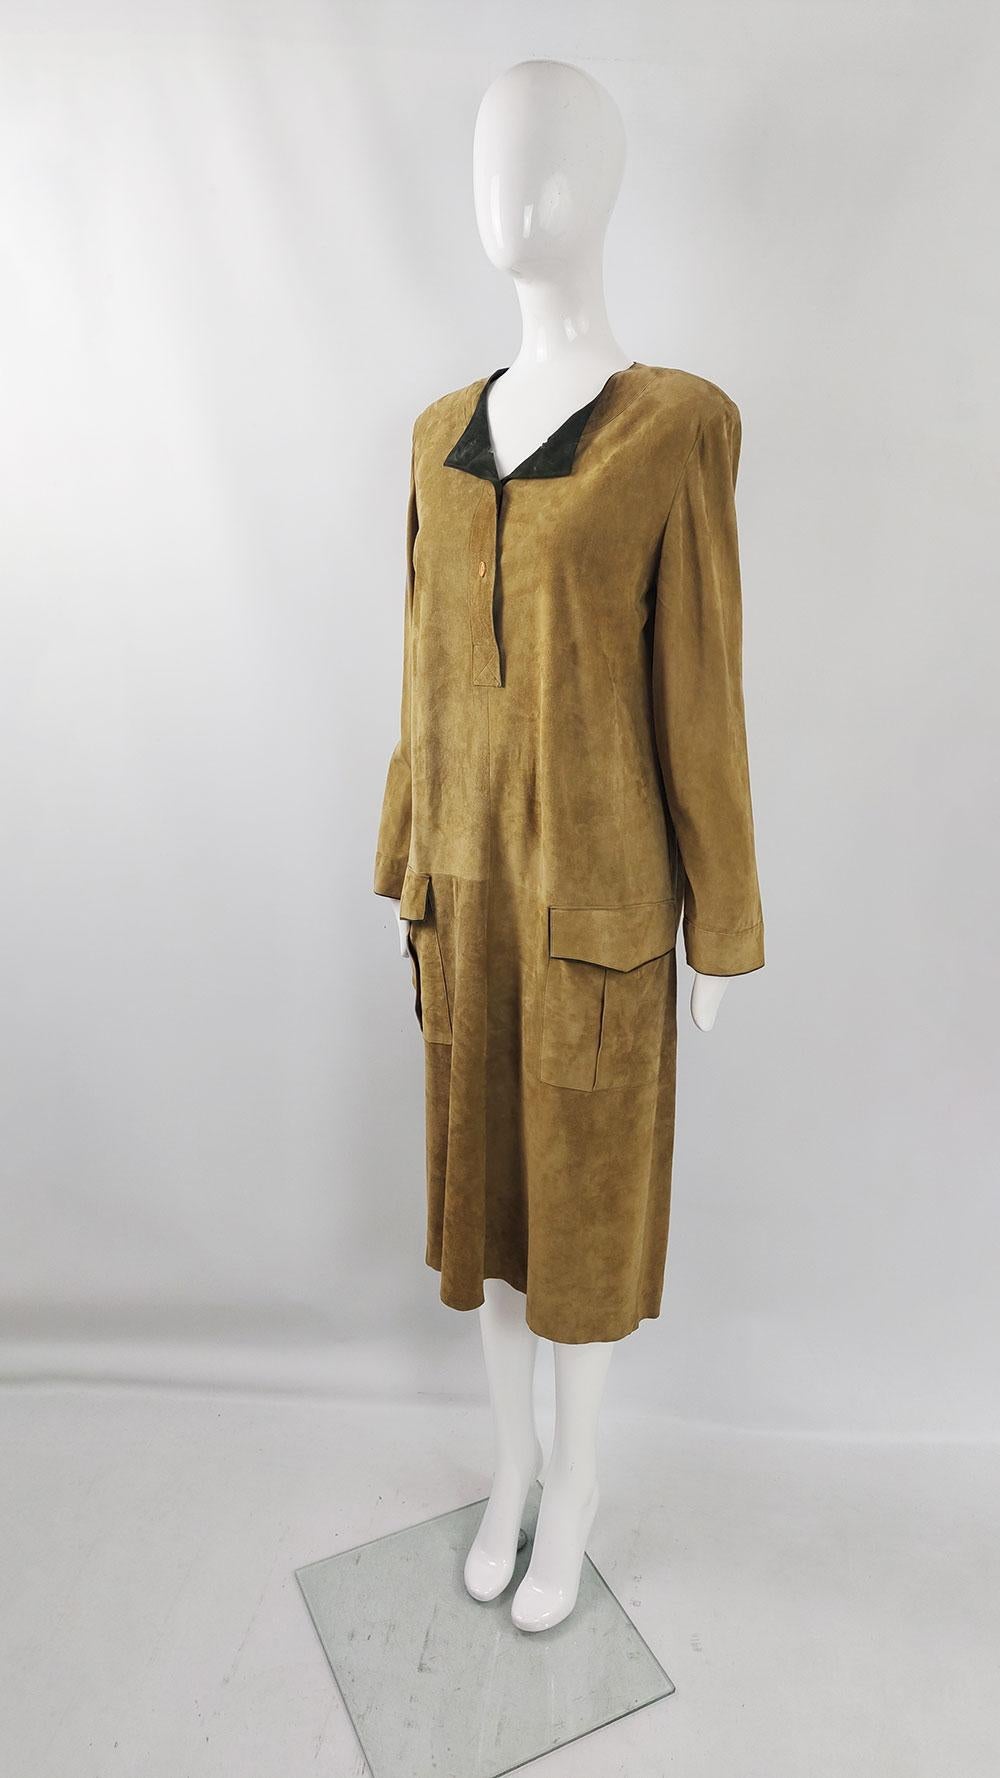 Mario Valentino Vintage Tan & Green Suede Long Sleeve Shift Dress In Good Condition For Sale In Doncaster, South Yorkshire